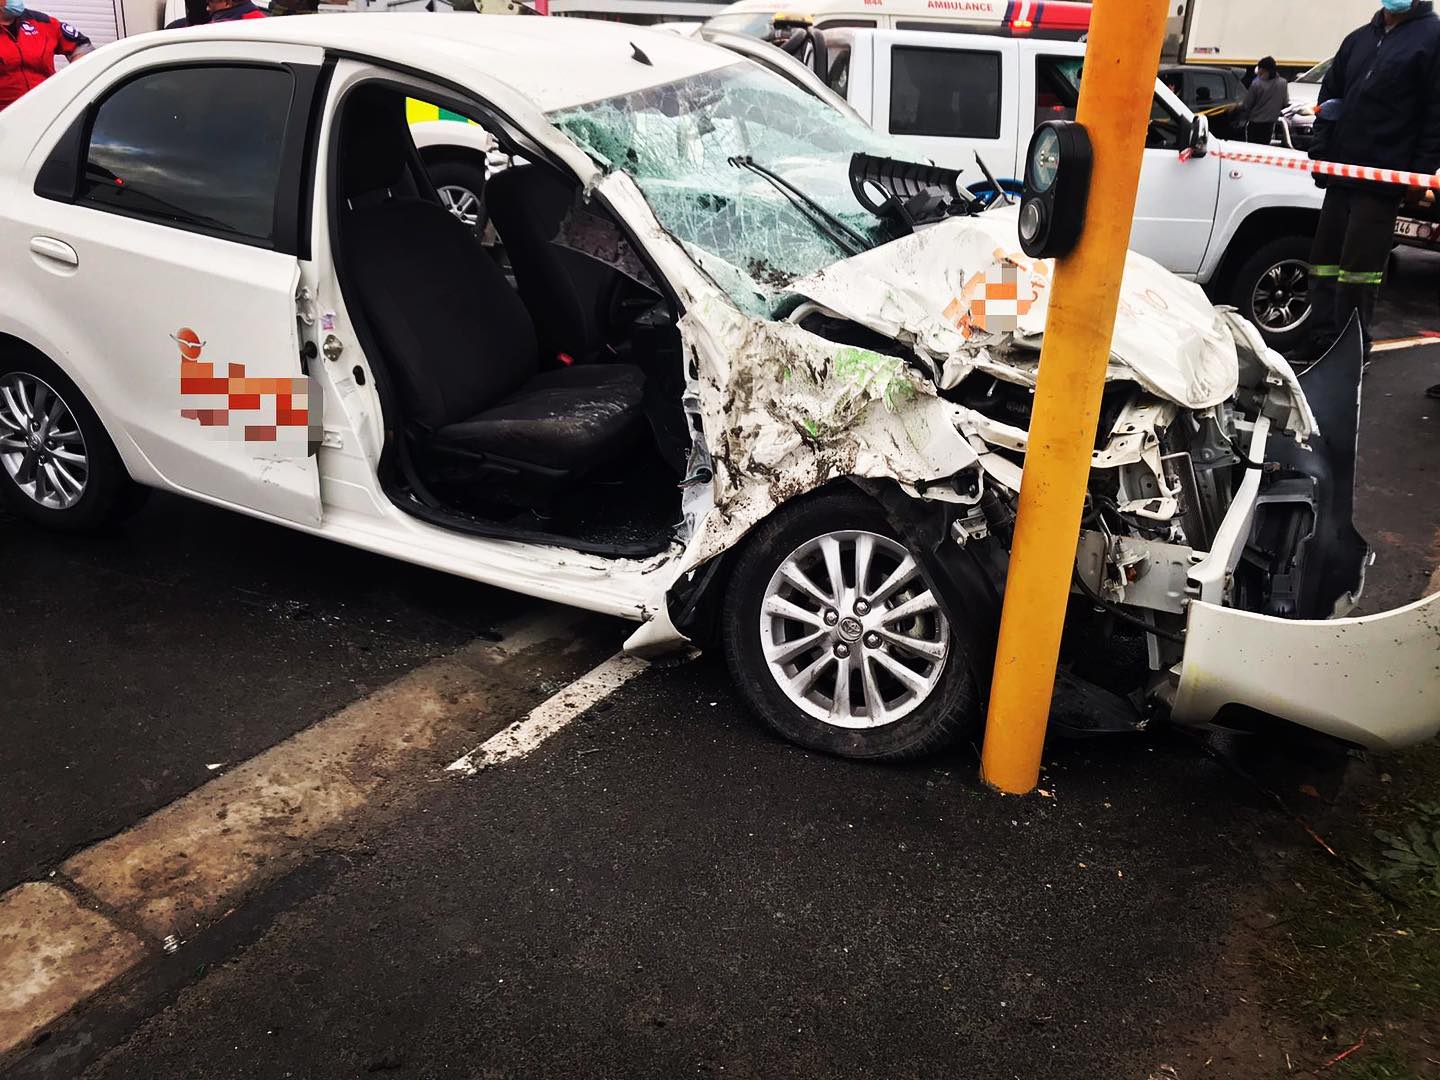 Two injured as car and bus collide in Parow